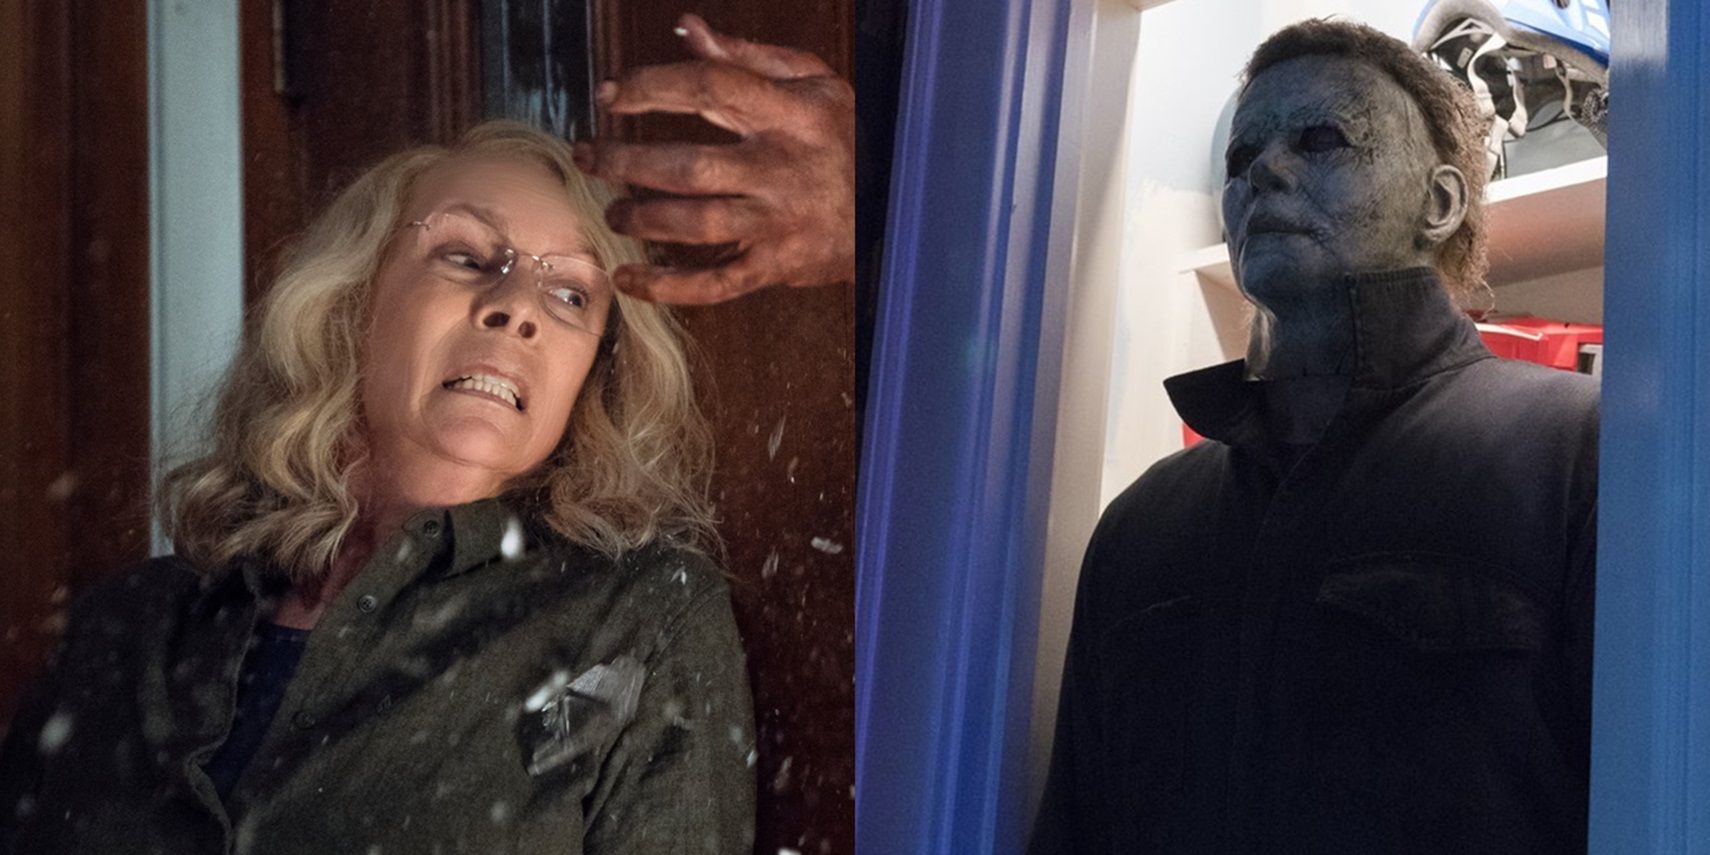 Halloween Kills 5 Things It Needs To Improve From The 2018 Reboot (& 5 It Should Keep The Same)